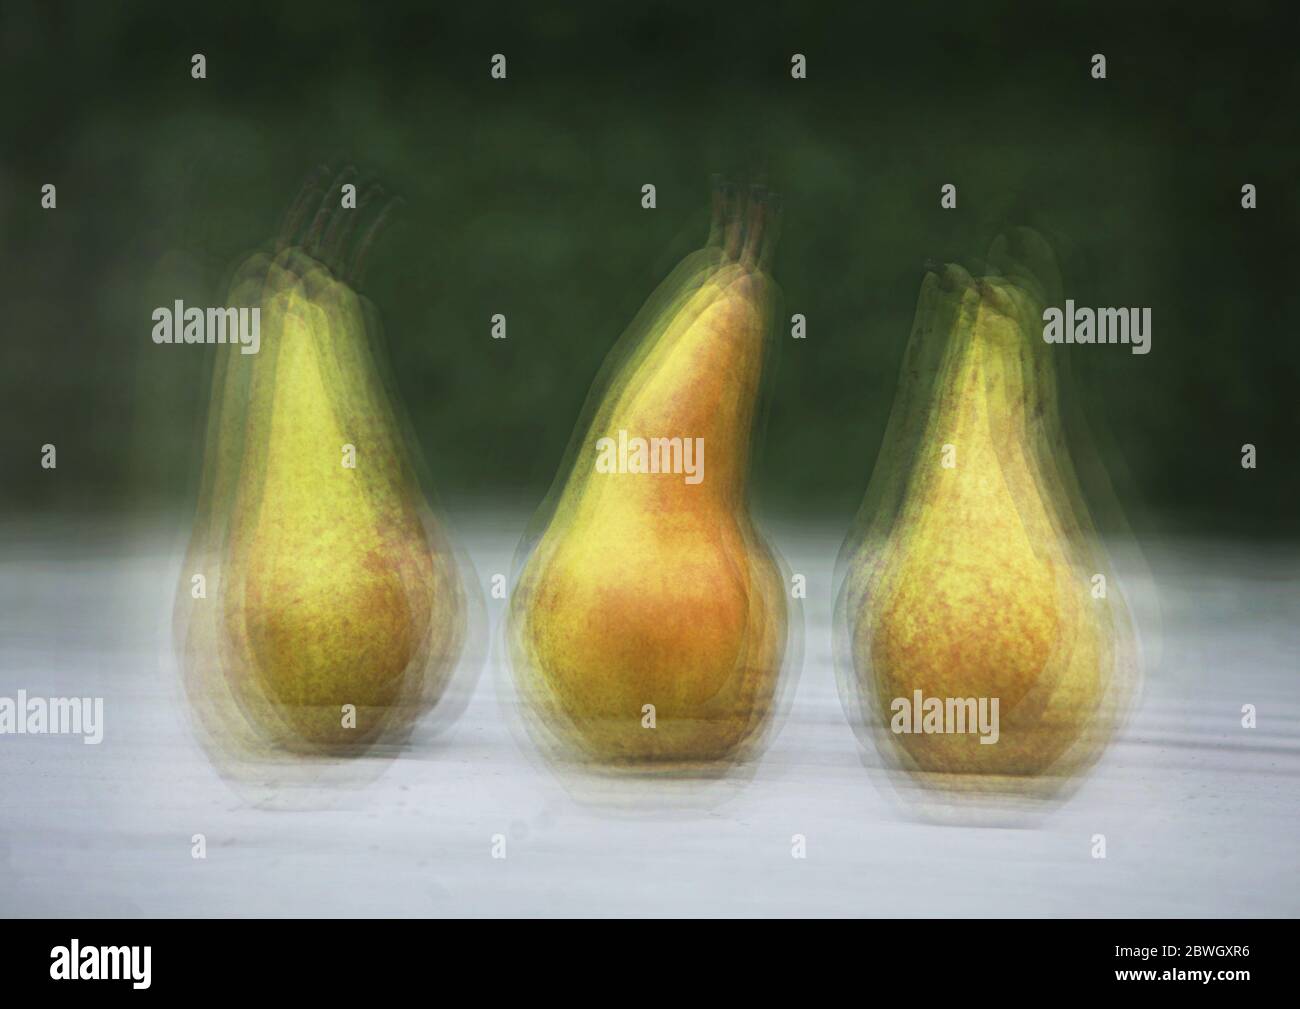 3 pears in impressionist photograph Stock Photo